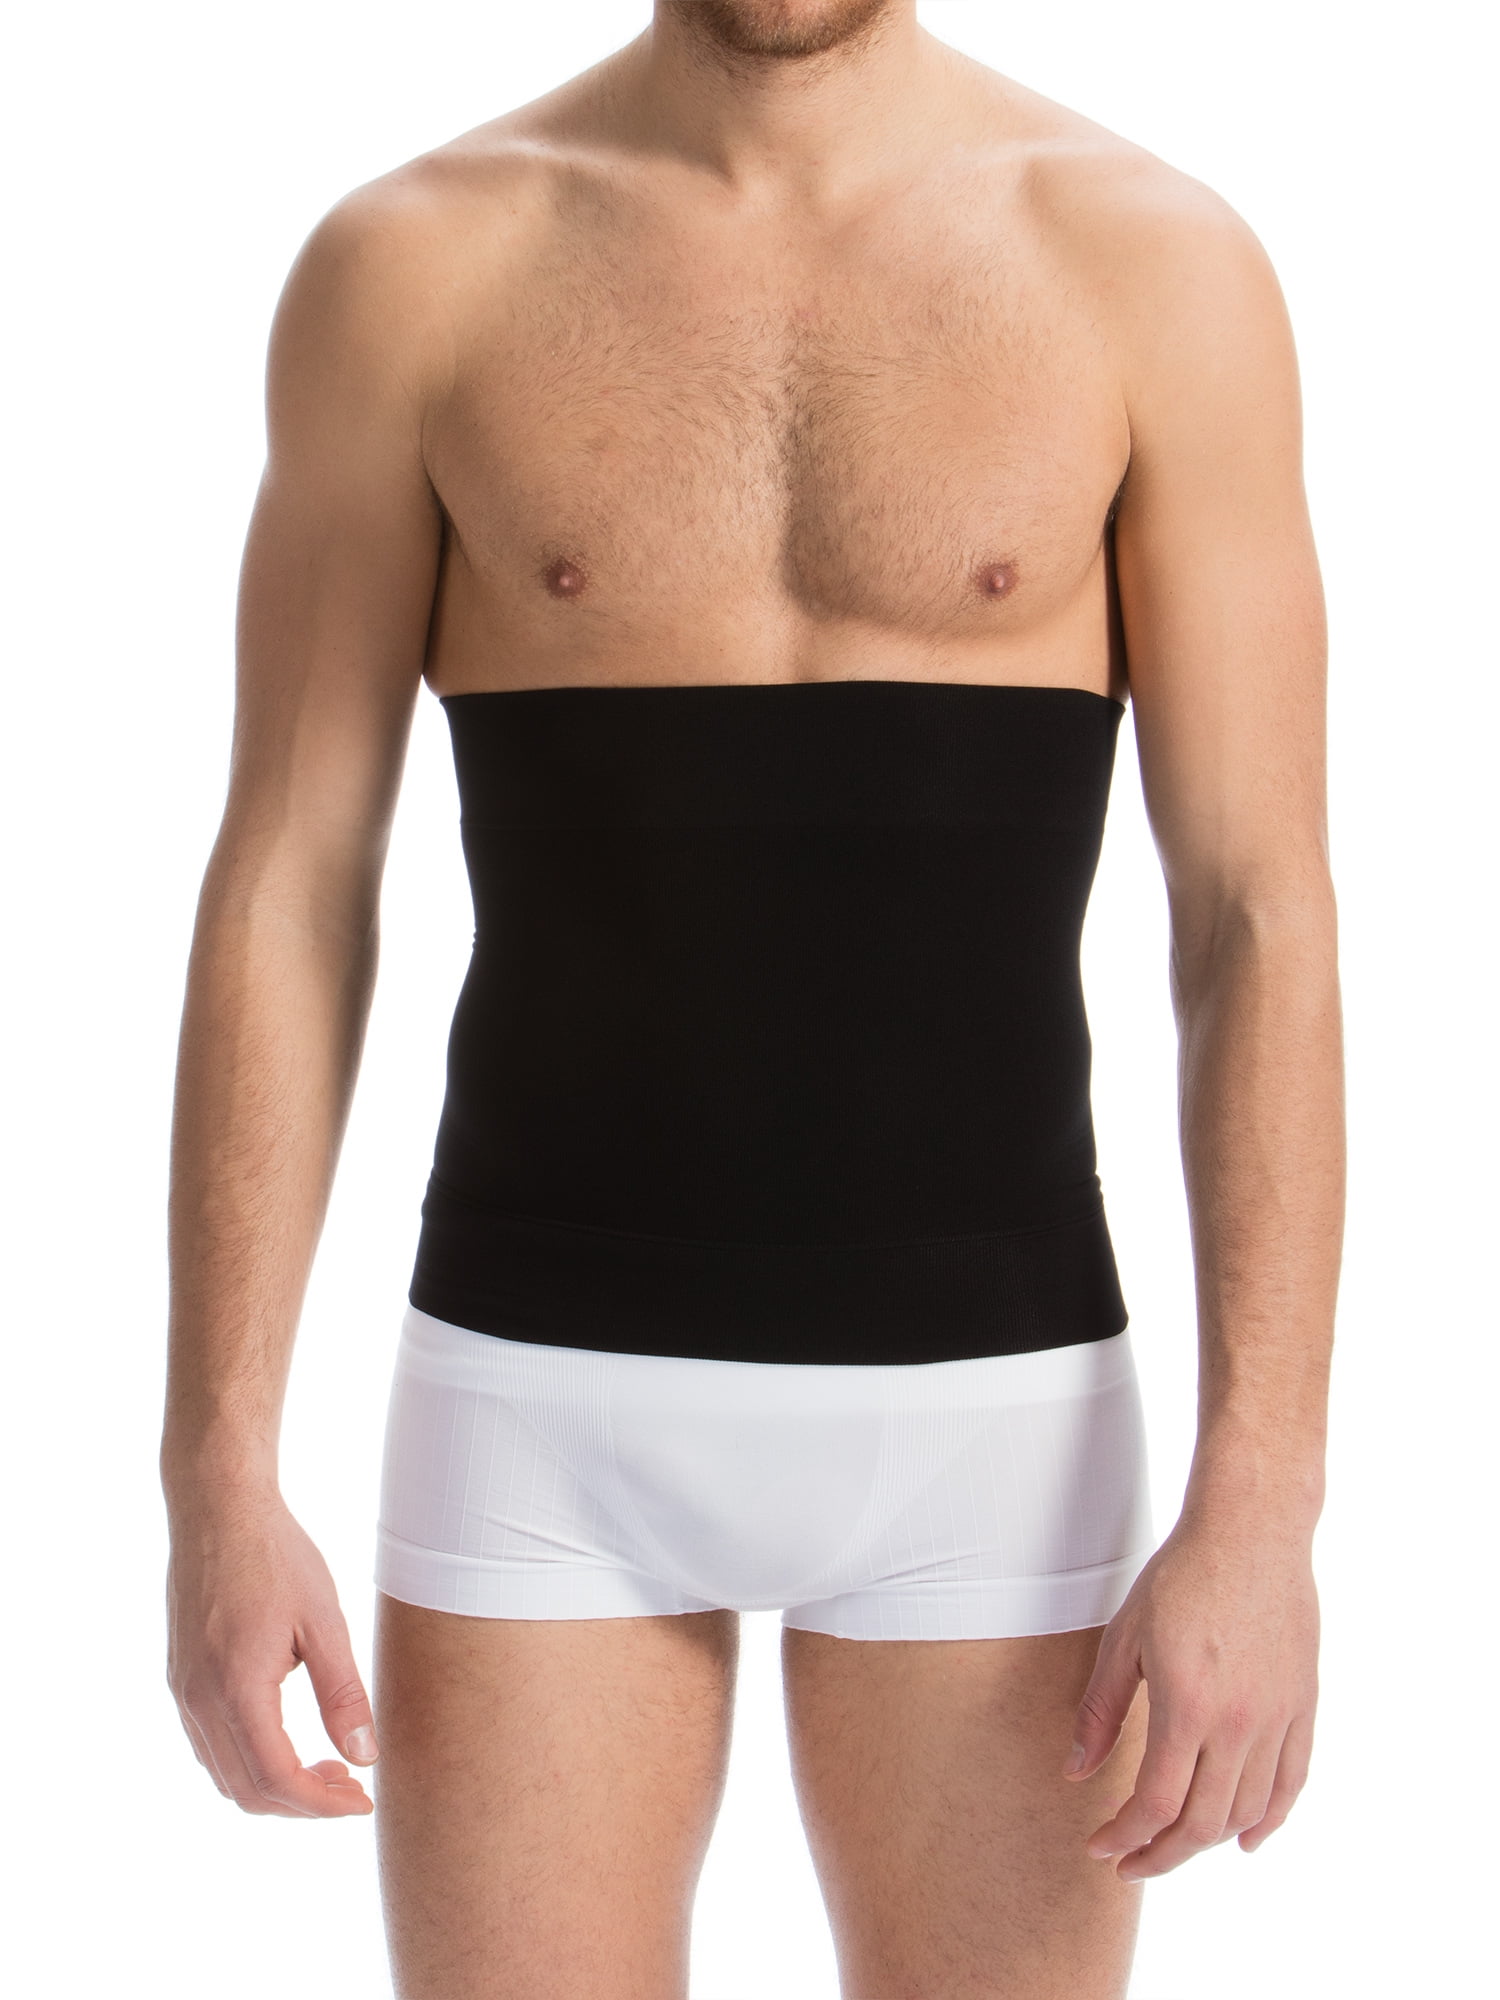 BODYSMOOTHERS GIRDLE-AT-THE-TOP